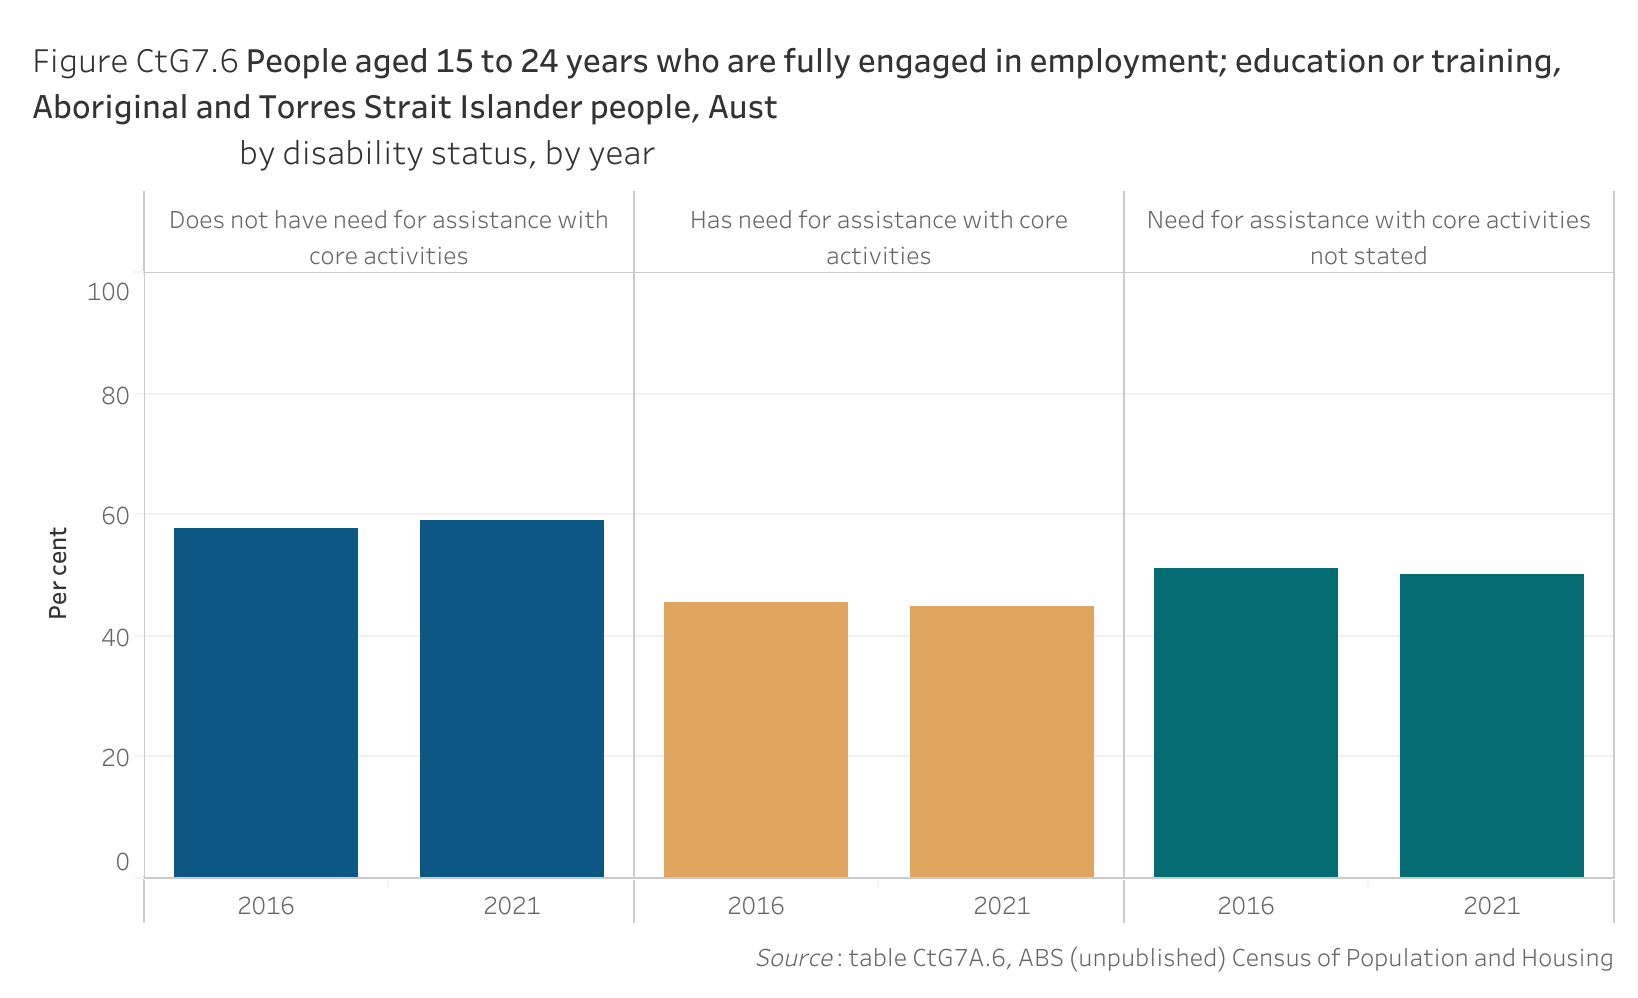 Figure CtG7.6 shows people aged 15 to 24 years who are fully engaged in employment; education or training, Aboriginal and Torres Strait Islander people, Australia, by disability status, by year. More details can be found within the text near this image.